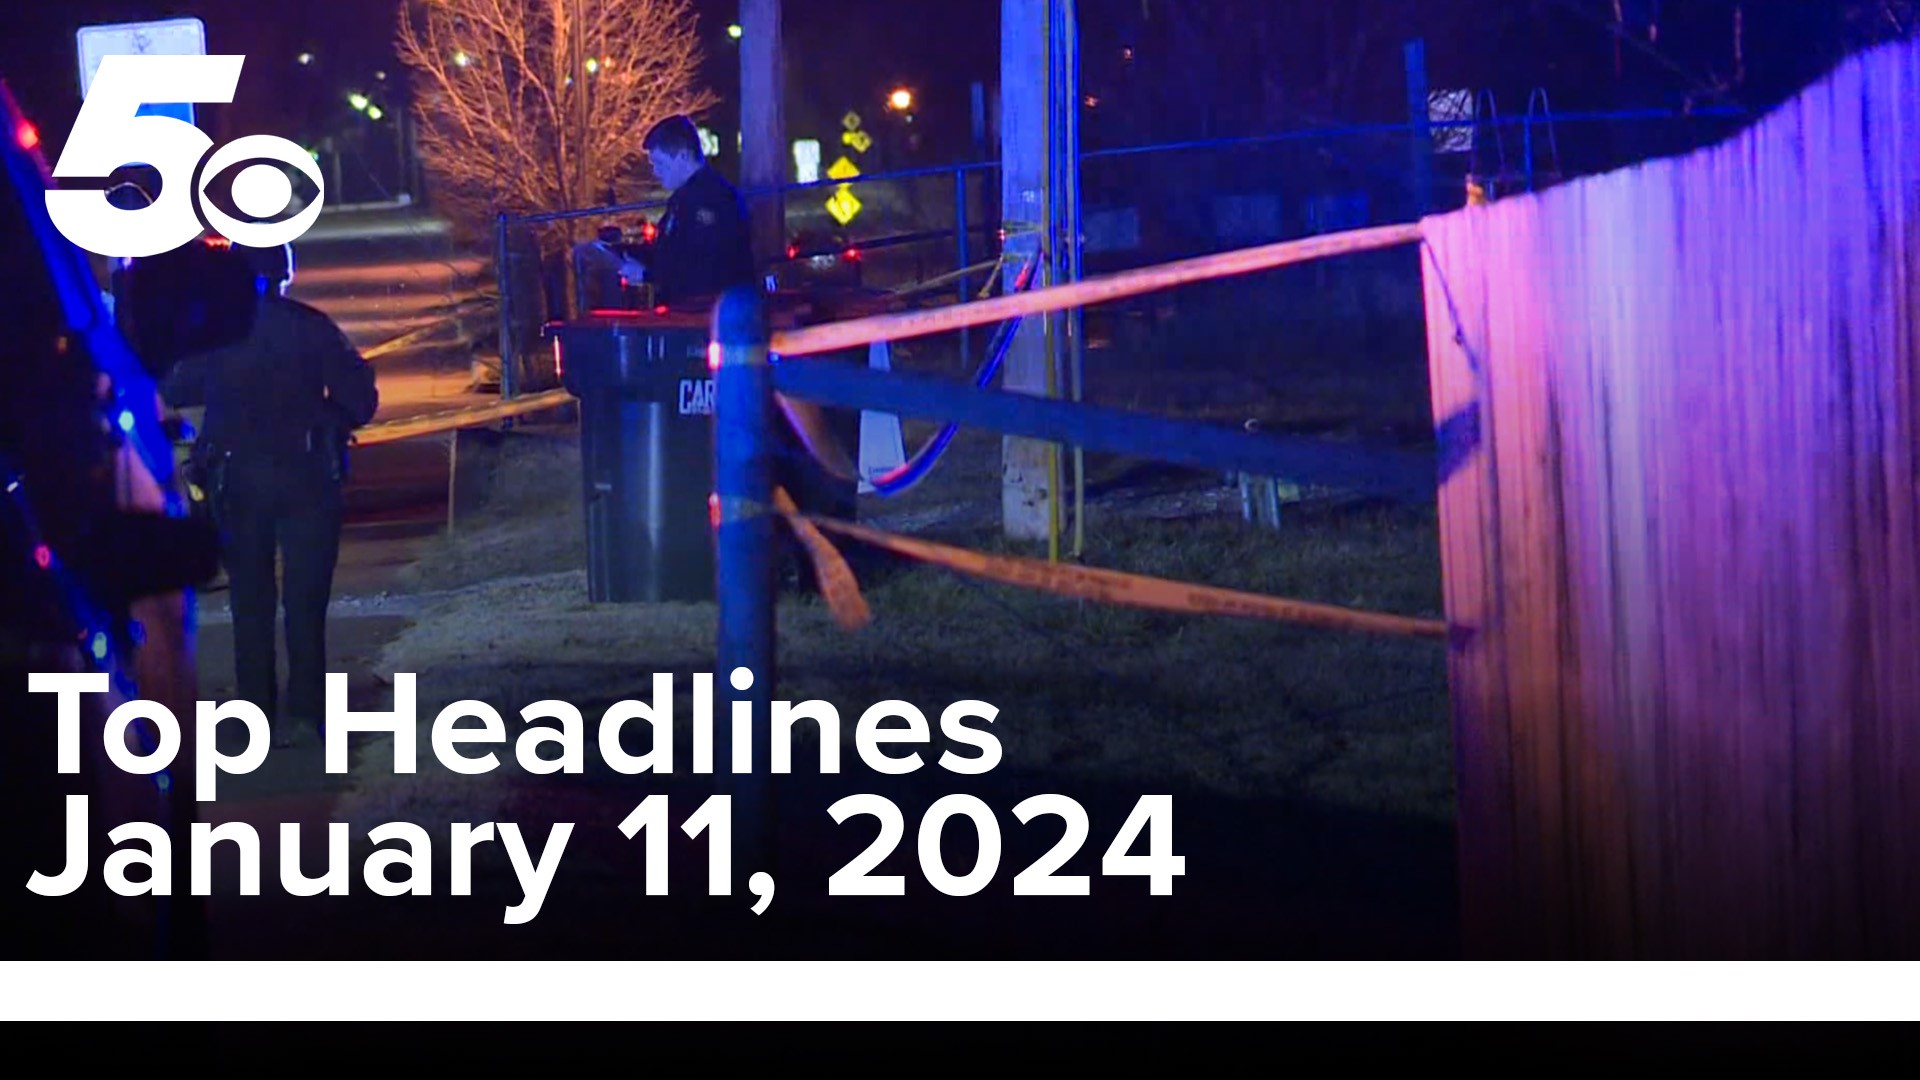 Don't miss out on your 5NEWS Top Headlines from Jan. 11, 2024.